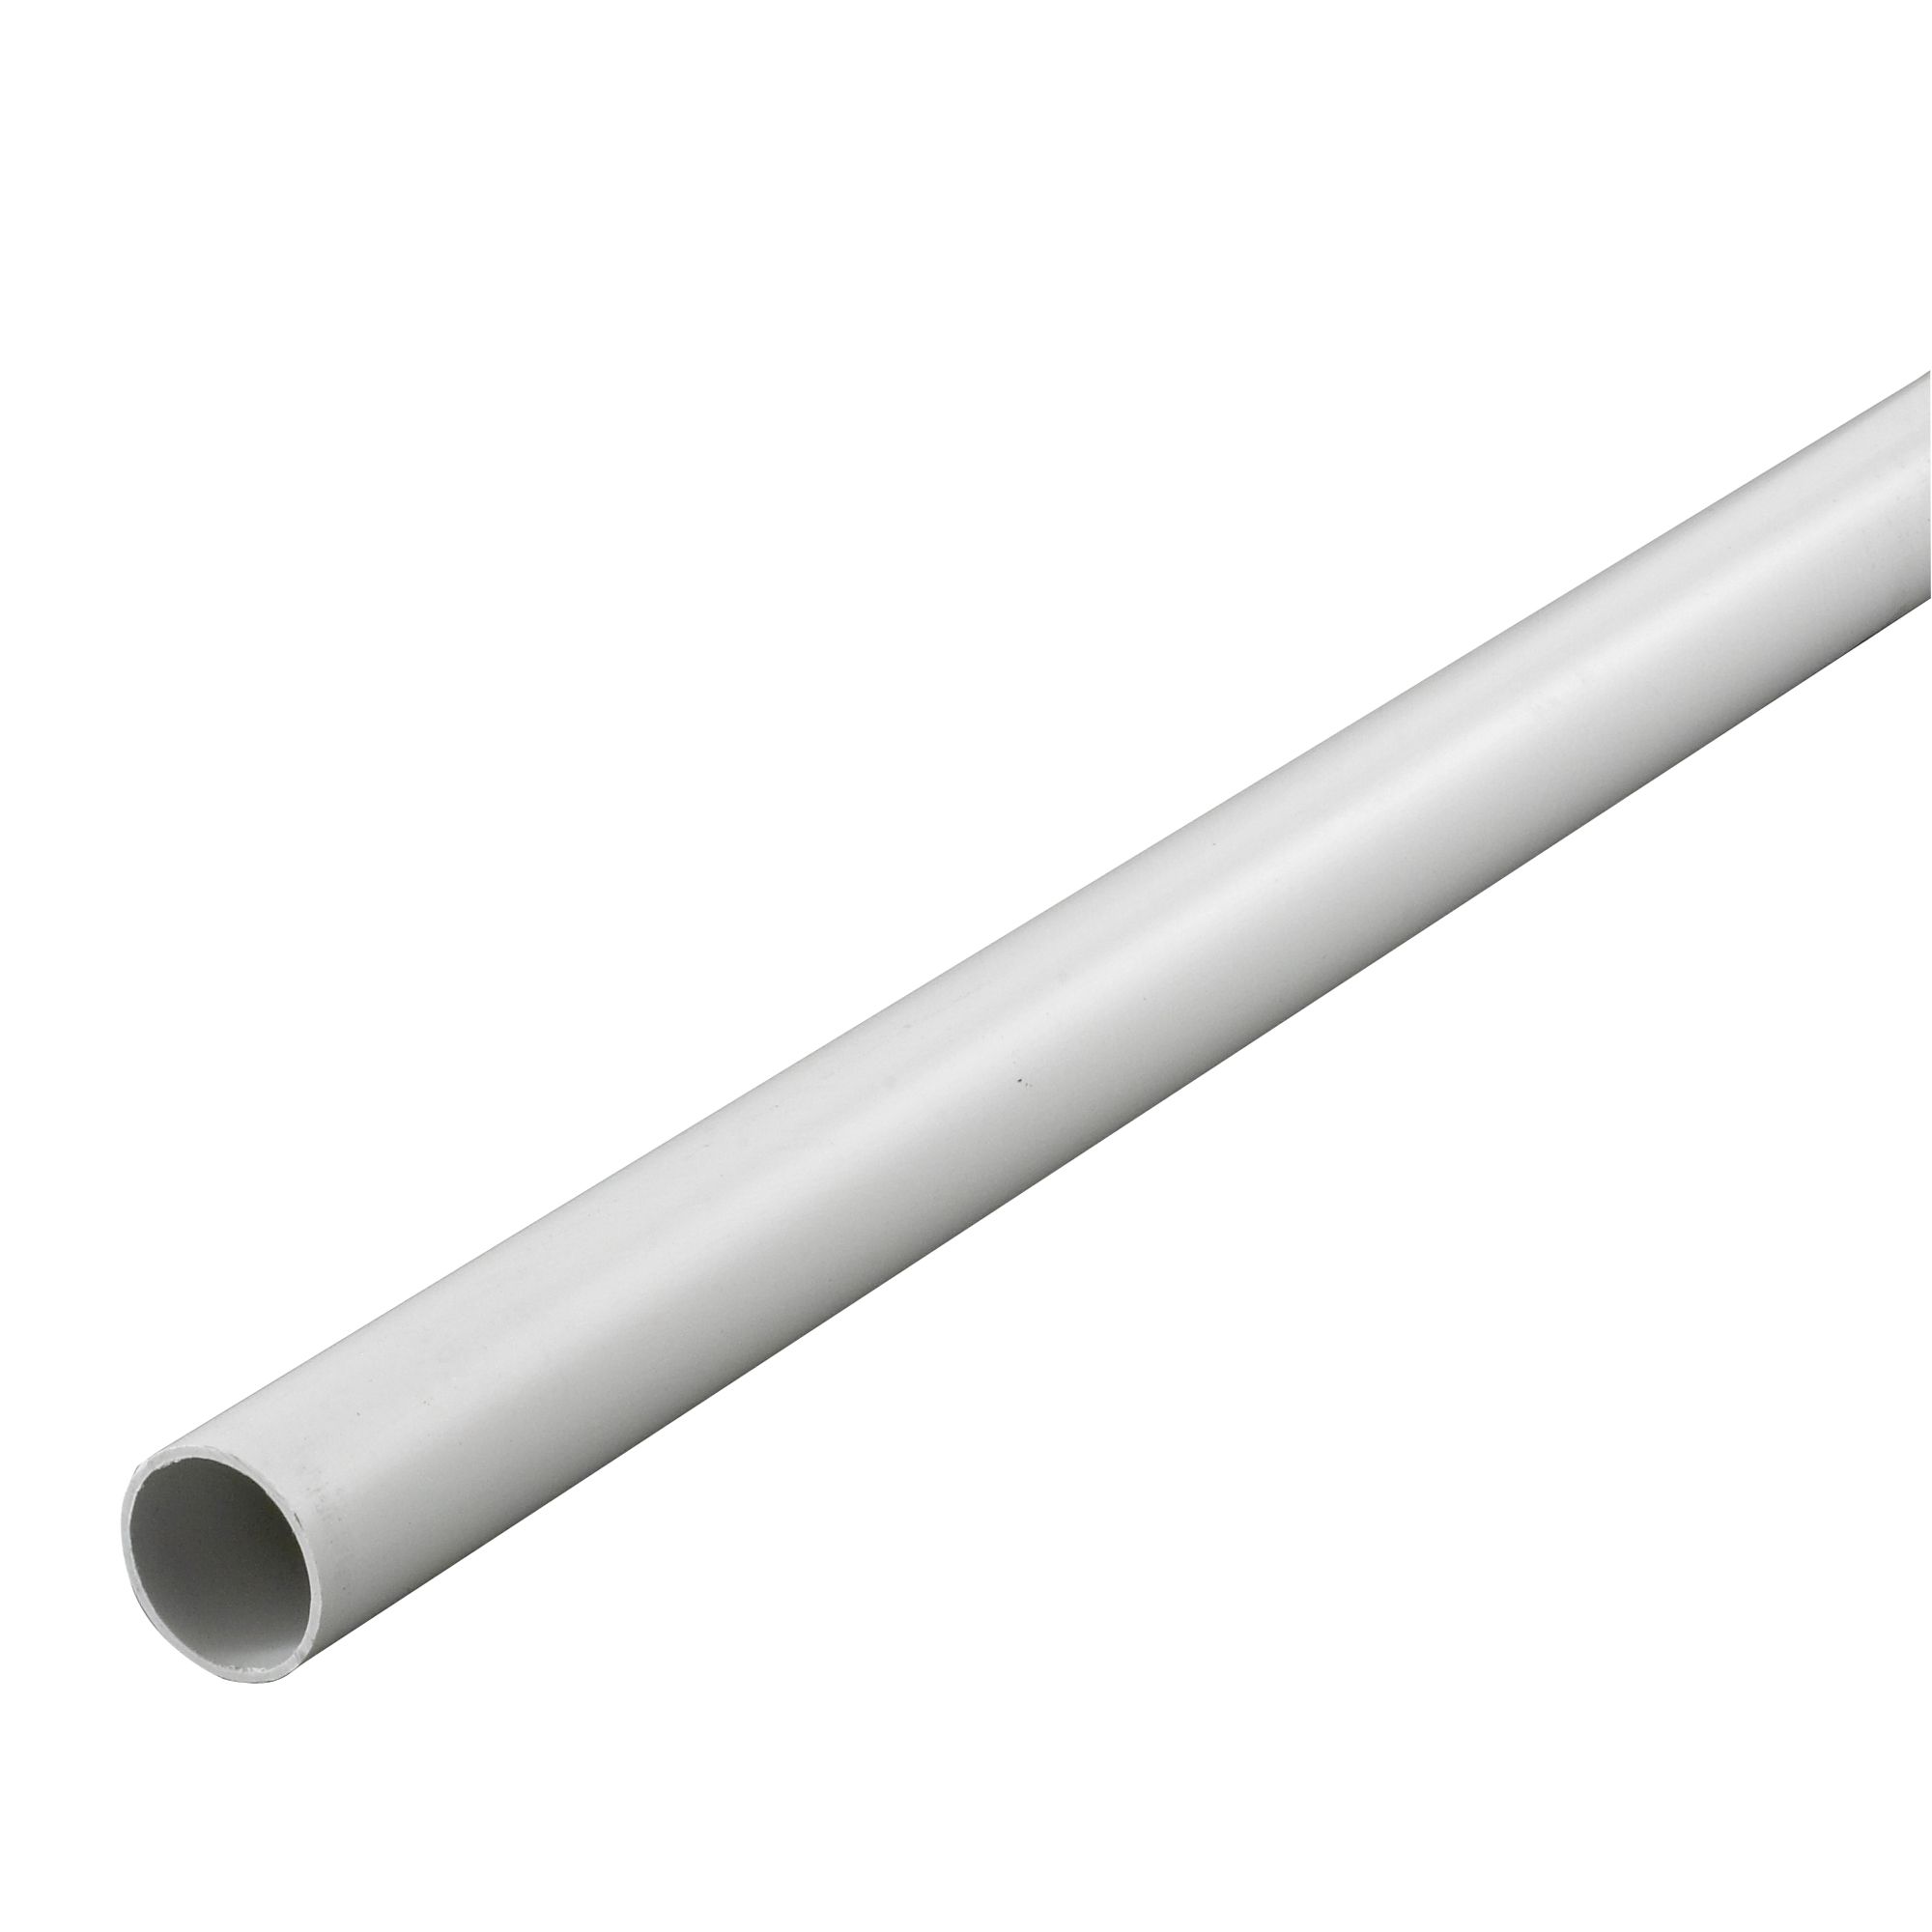 Floplast White Solvent Weld Waste Pipe L 2m Dia 40mm Departments Diy At B Q